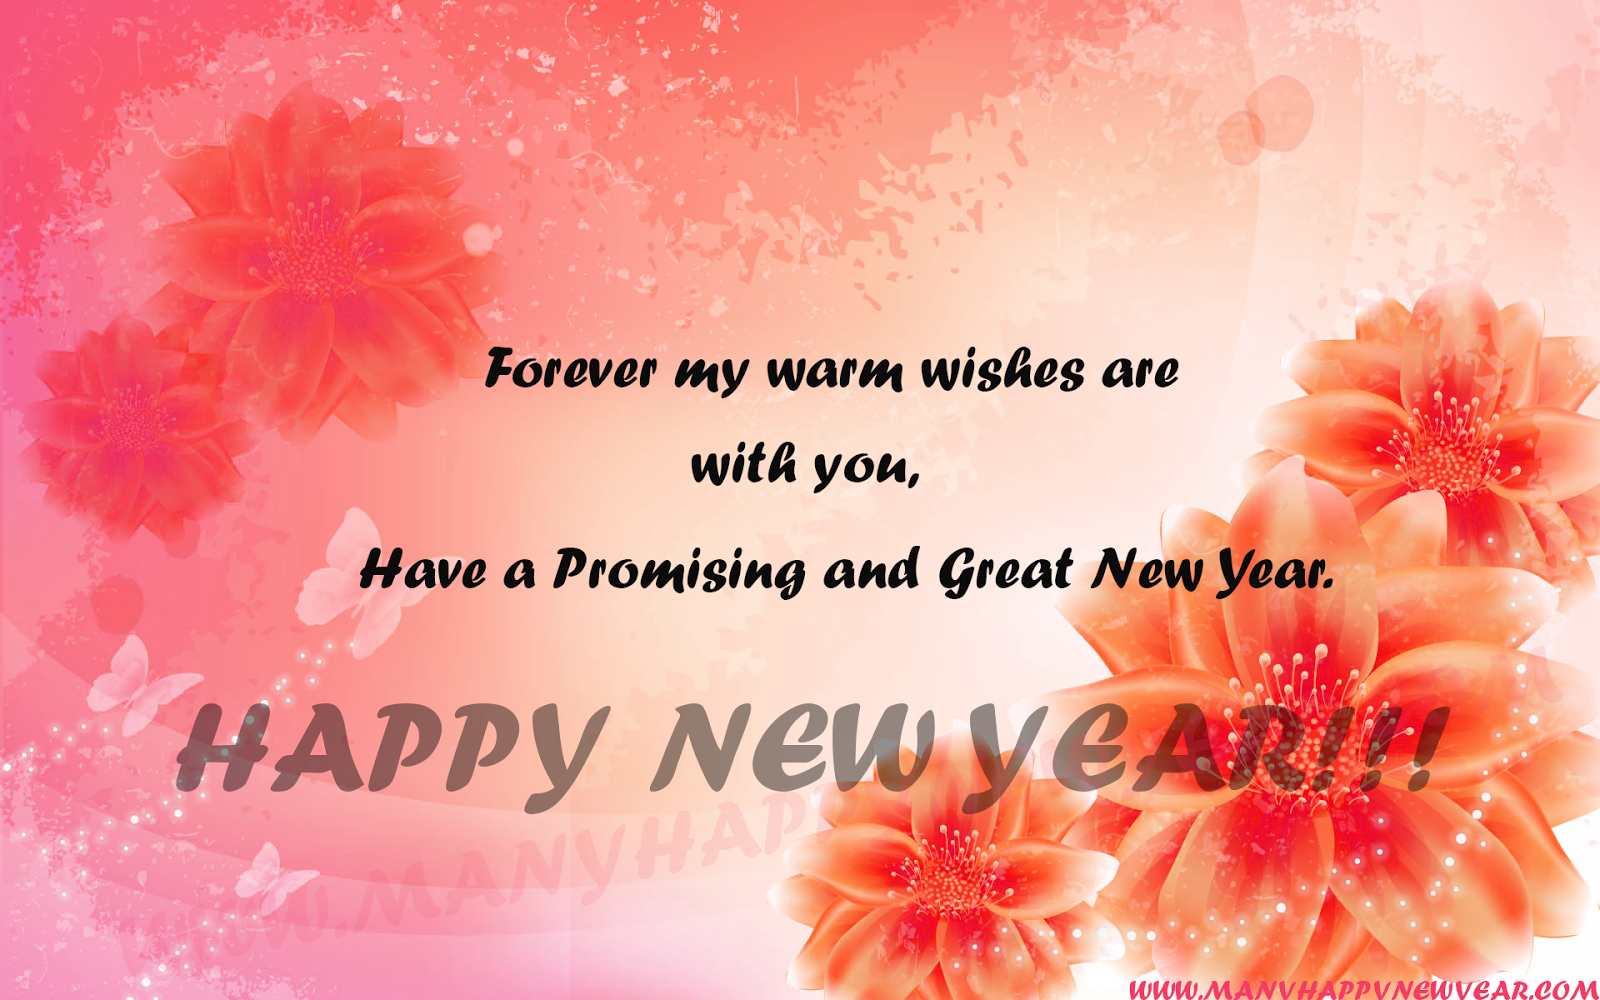 New Year Messages 2018 - HD Wallpaper 